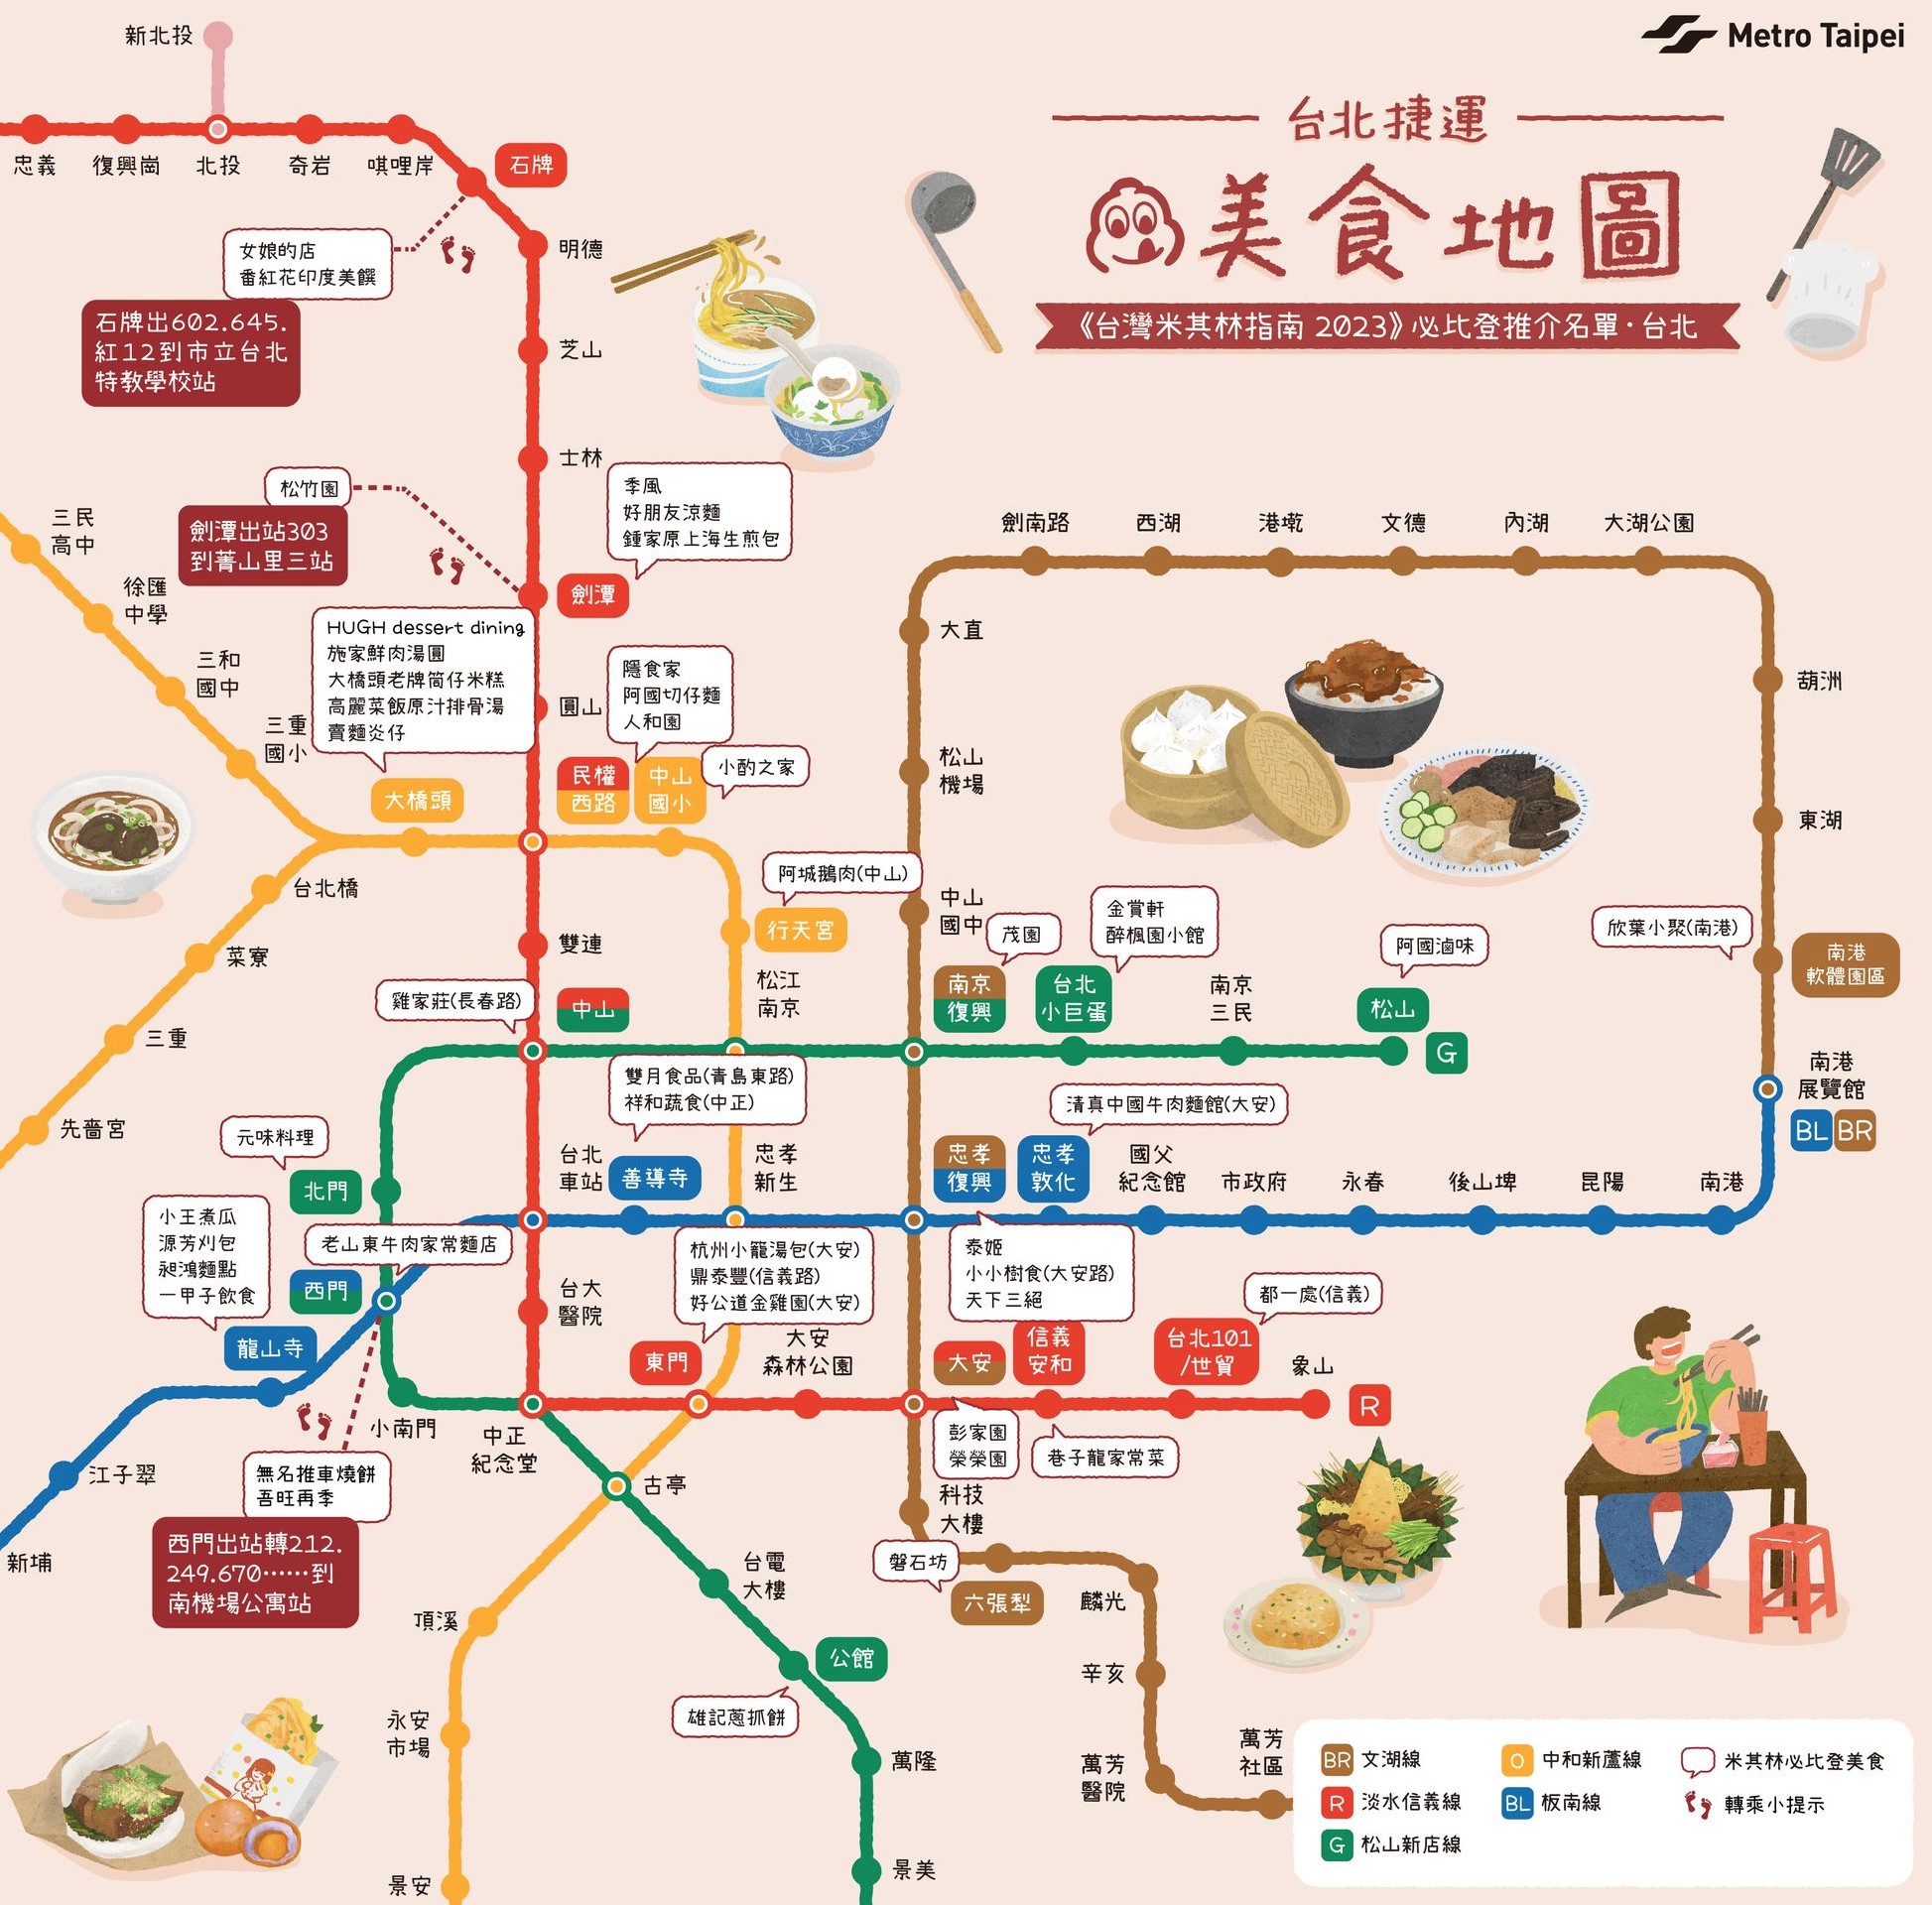 Taipei MRT Bib Gourmand Map guides you for detectable cuisine by MRT.  Photo reproduced from Metro Taipei Facebook